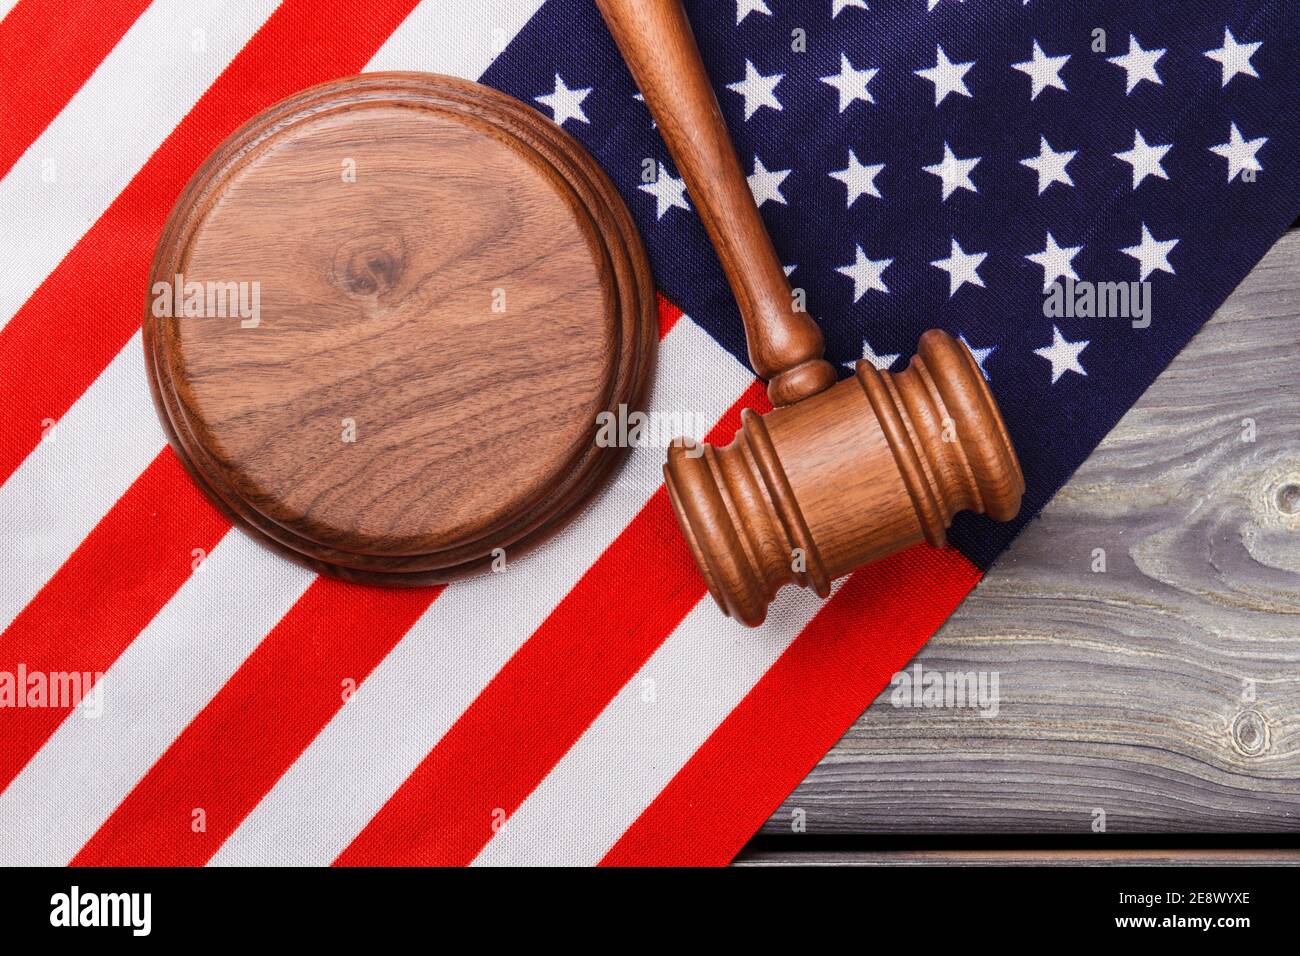 Judges wooden gavel with USA flag. Stock Photo